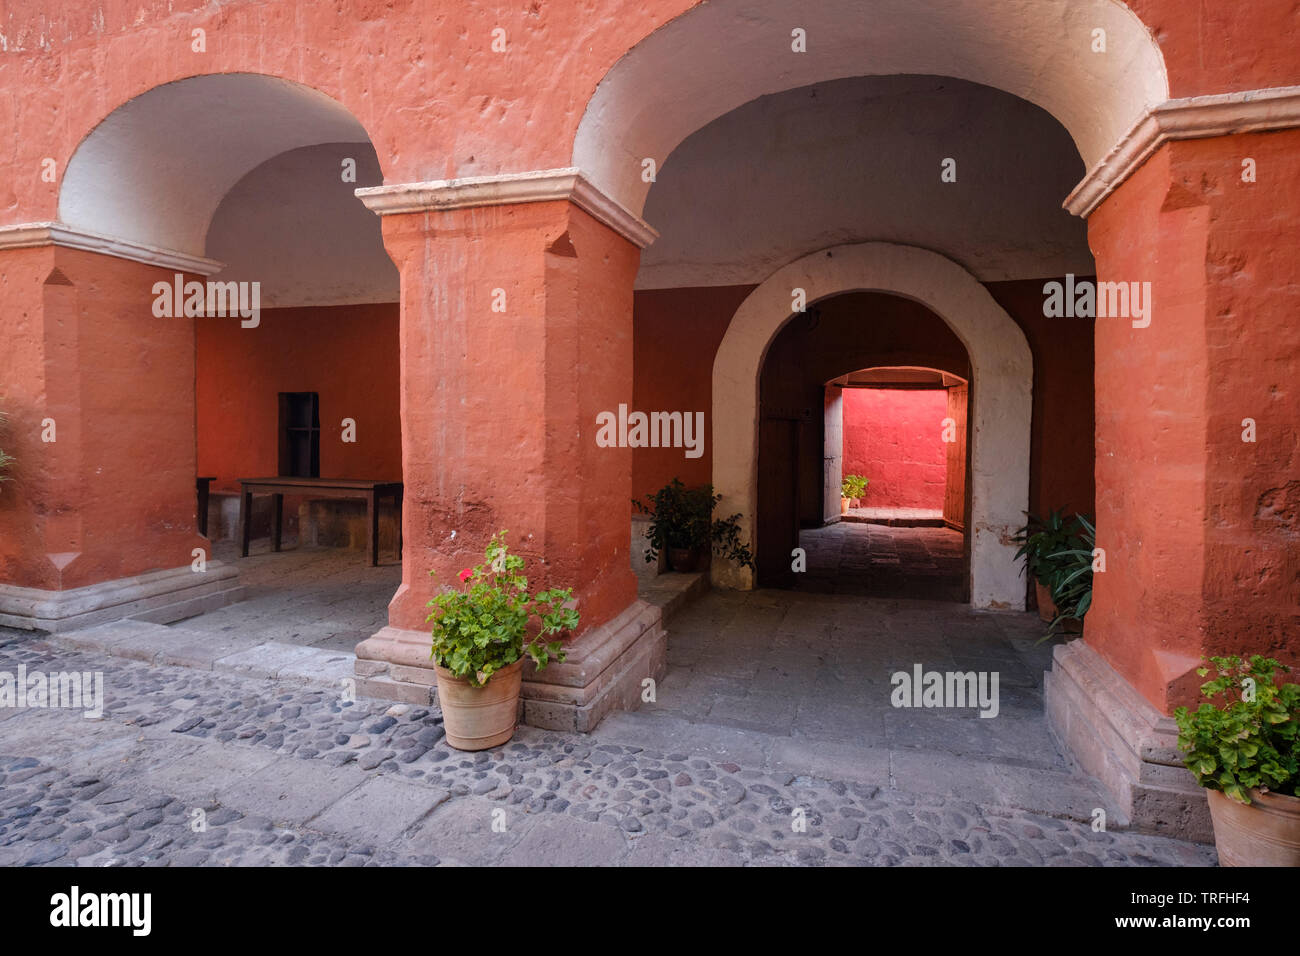 Monastery of Santa Catalina de Siena also known as Convent of Santa Catalina in the Historical Center of Arequipa, Peru Stock Photo